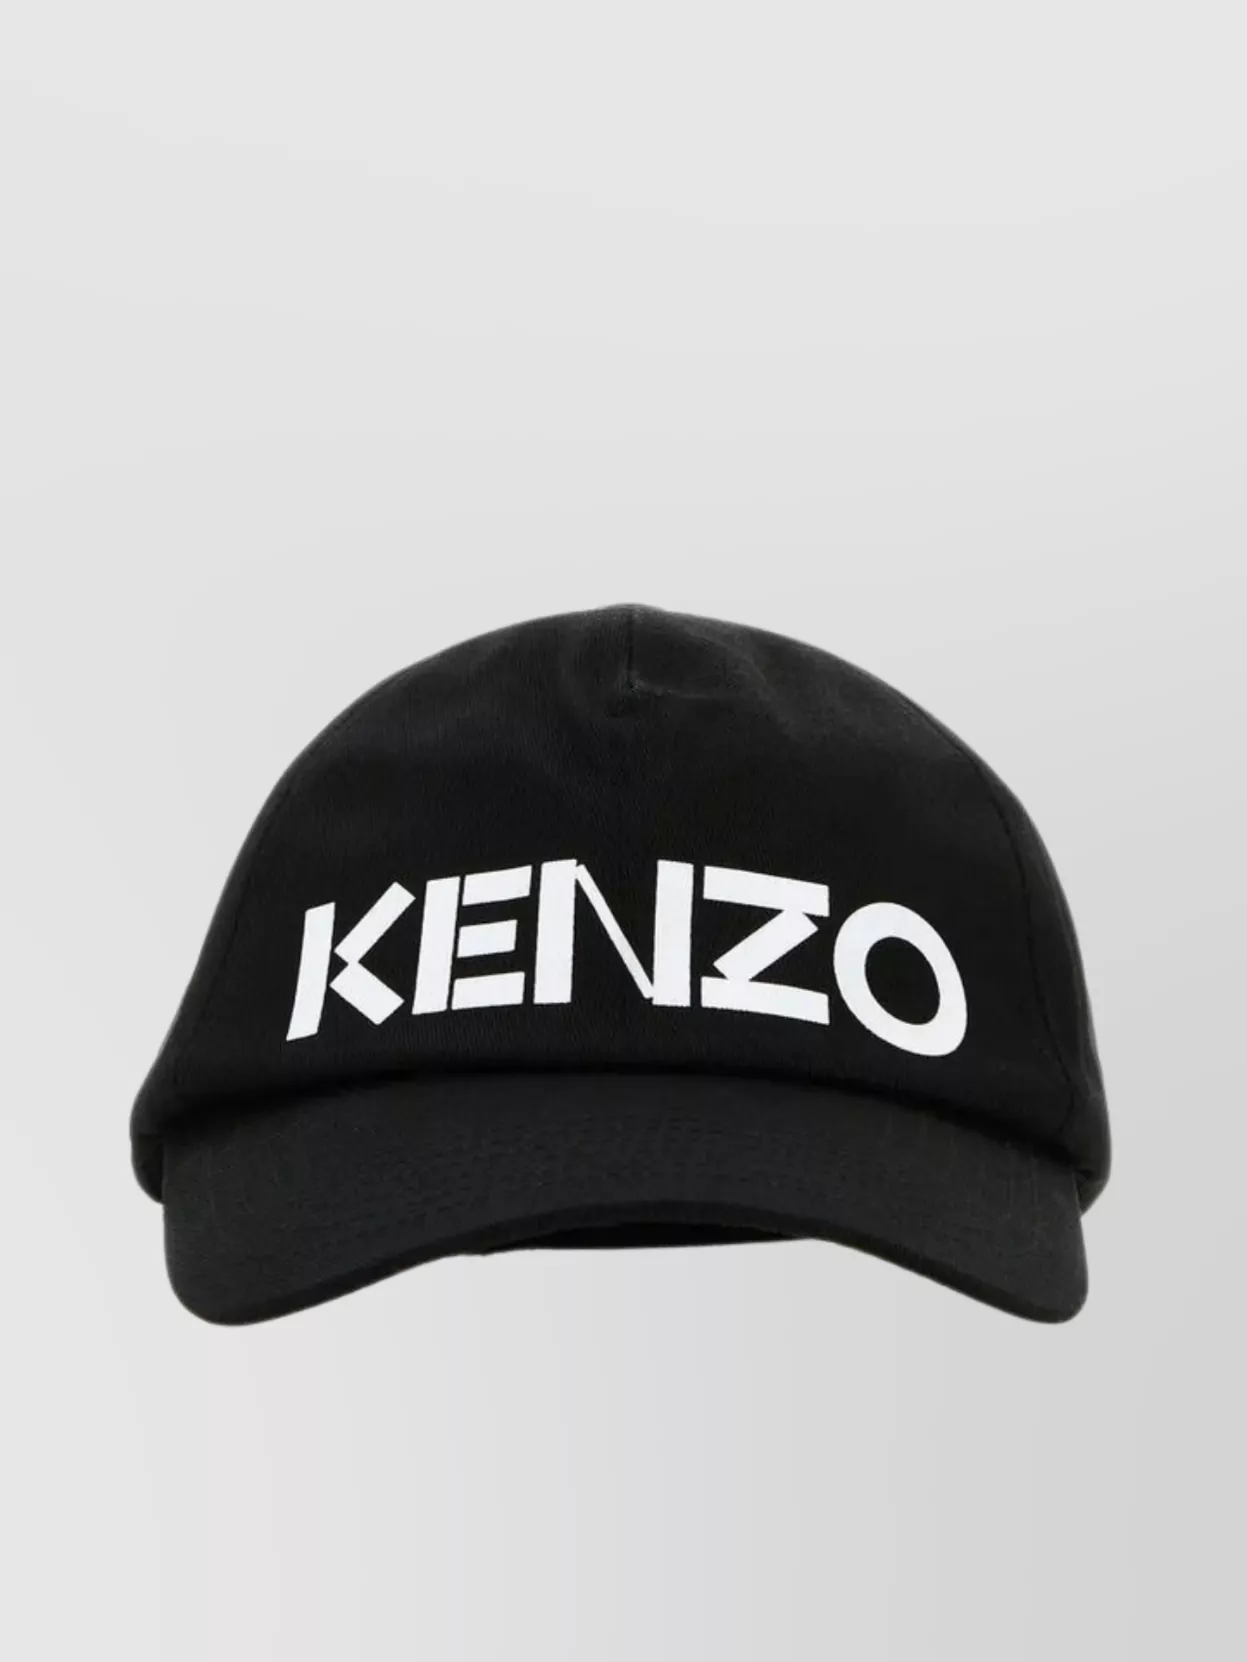 Kenzo Baseball Cap With Curved Brim And Unique Print In Black